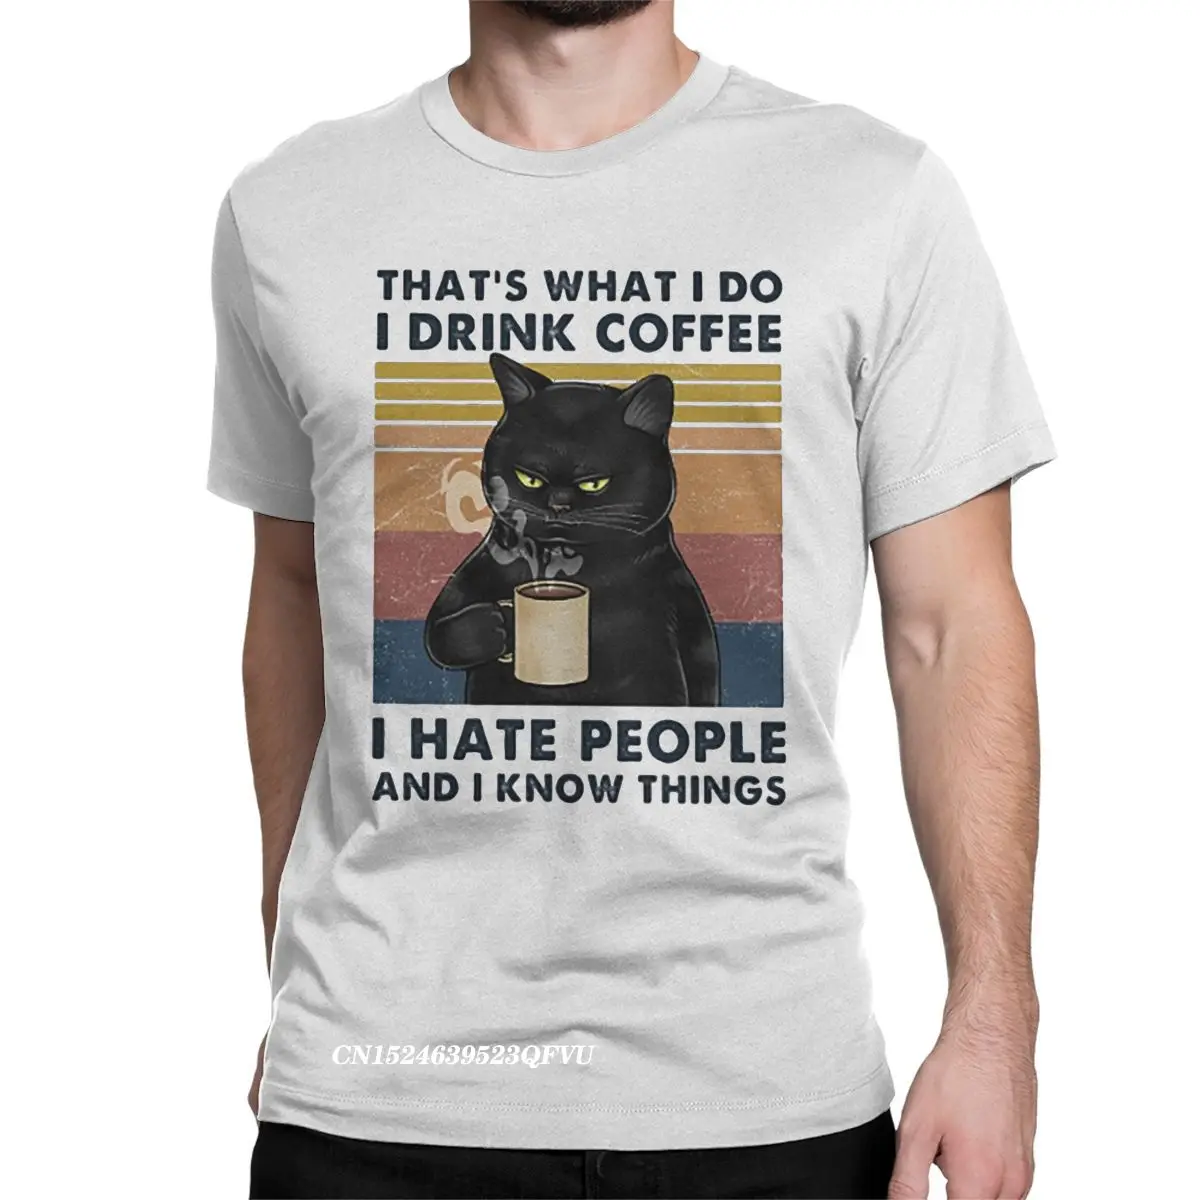 

Men Women's Tee Shirt I Drink Coffee I Hate People And I Know Things Hipster Tees Cat Lover Gifts Tops T Shirts Round Collar